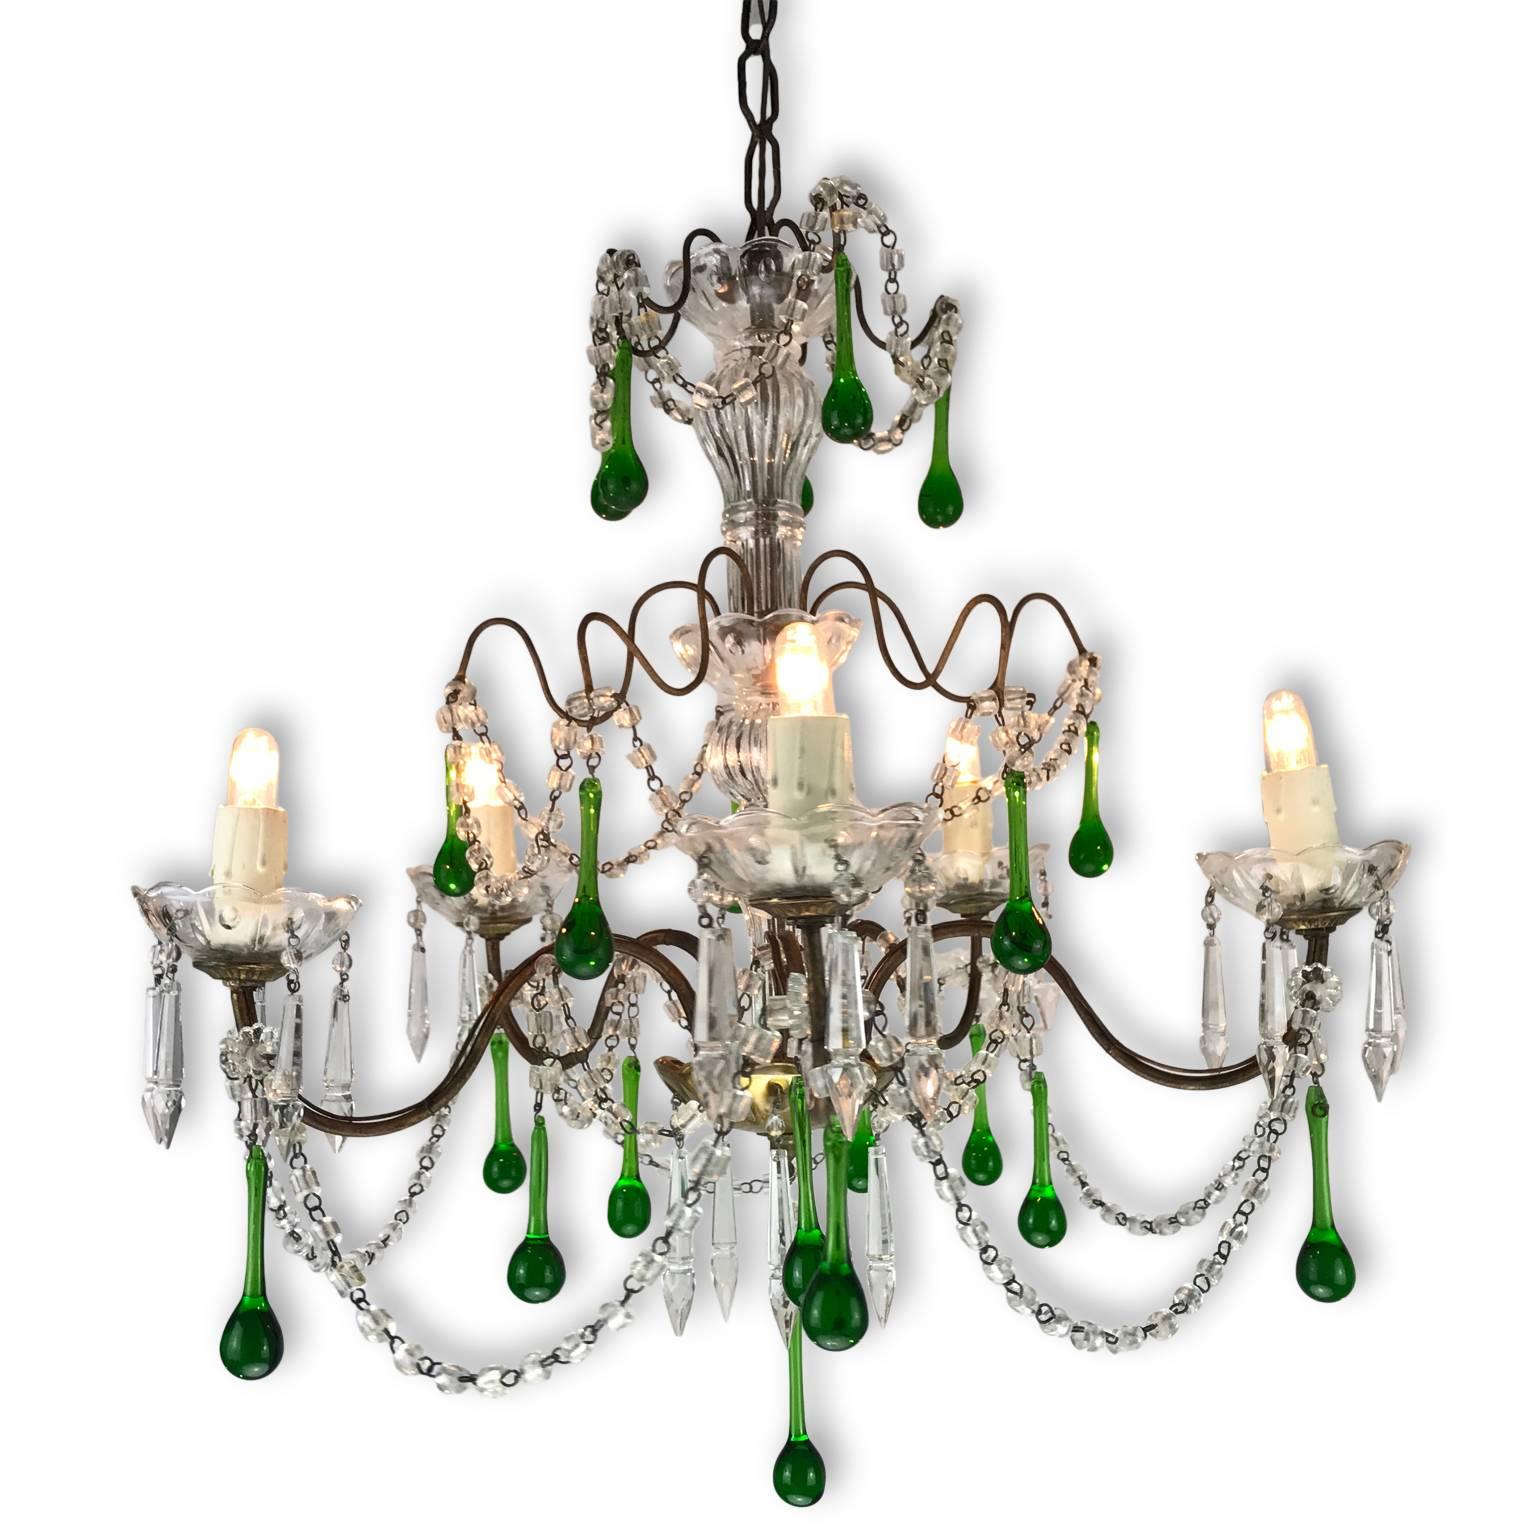 Vintage Italian Five-Light Crystal Chandelier with Green Crystal Drops 1970s 1